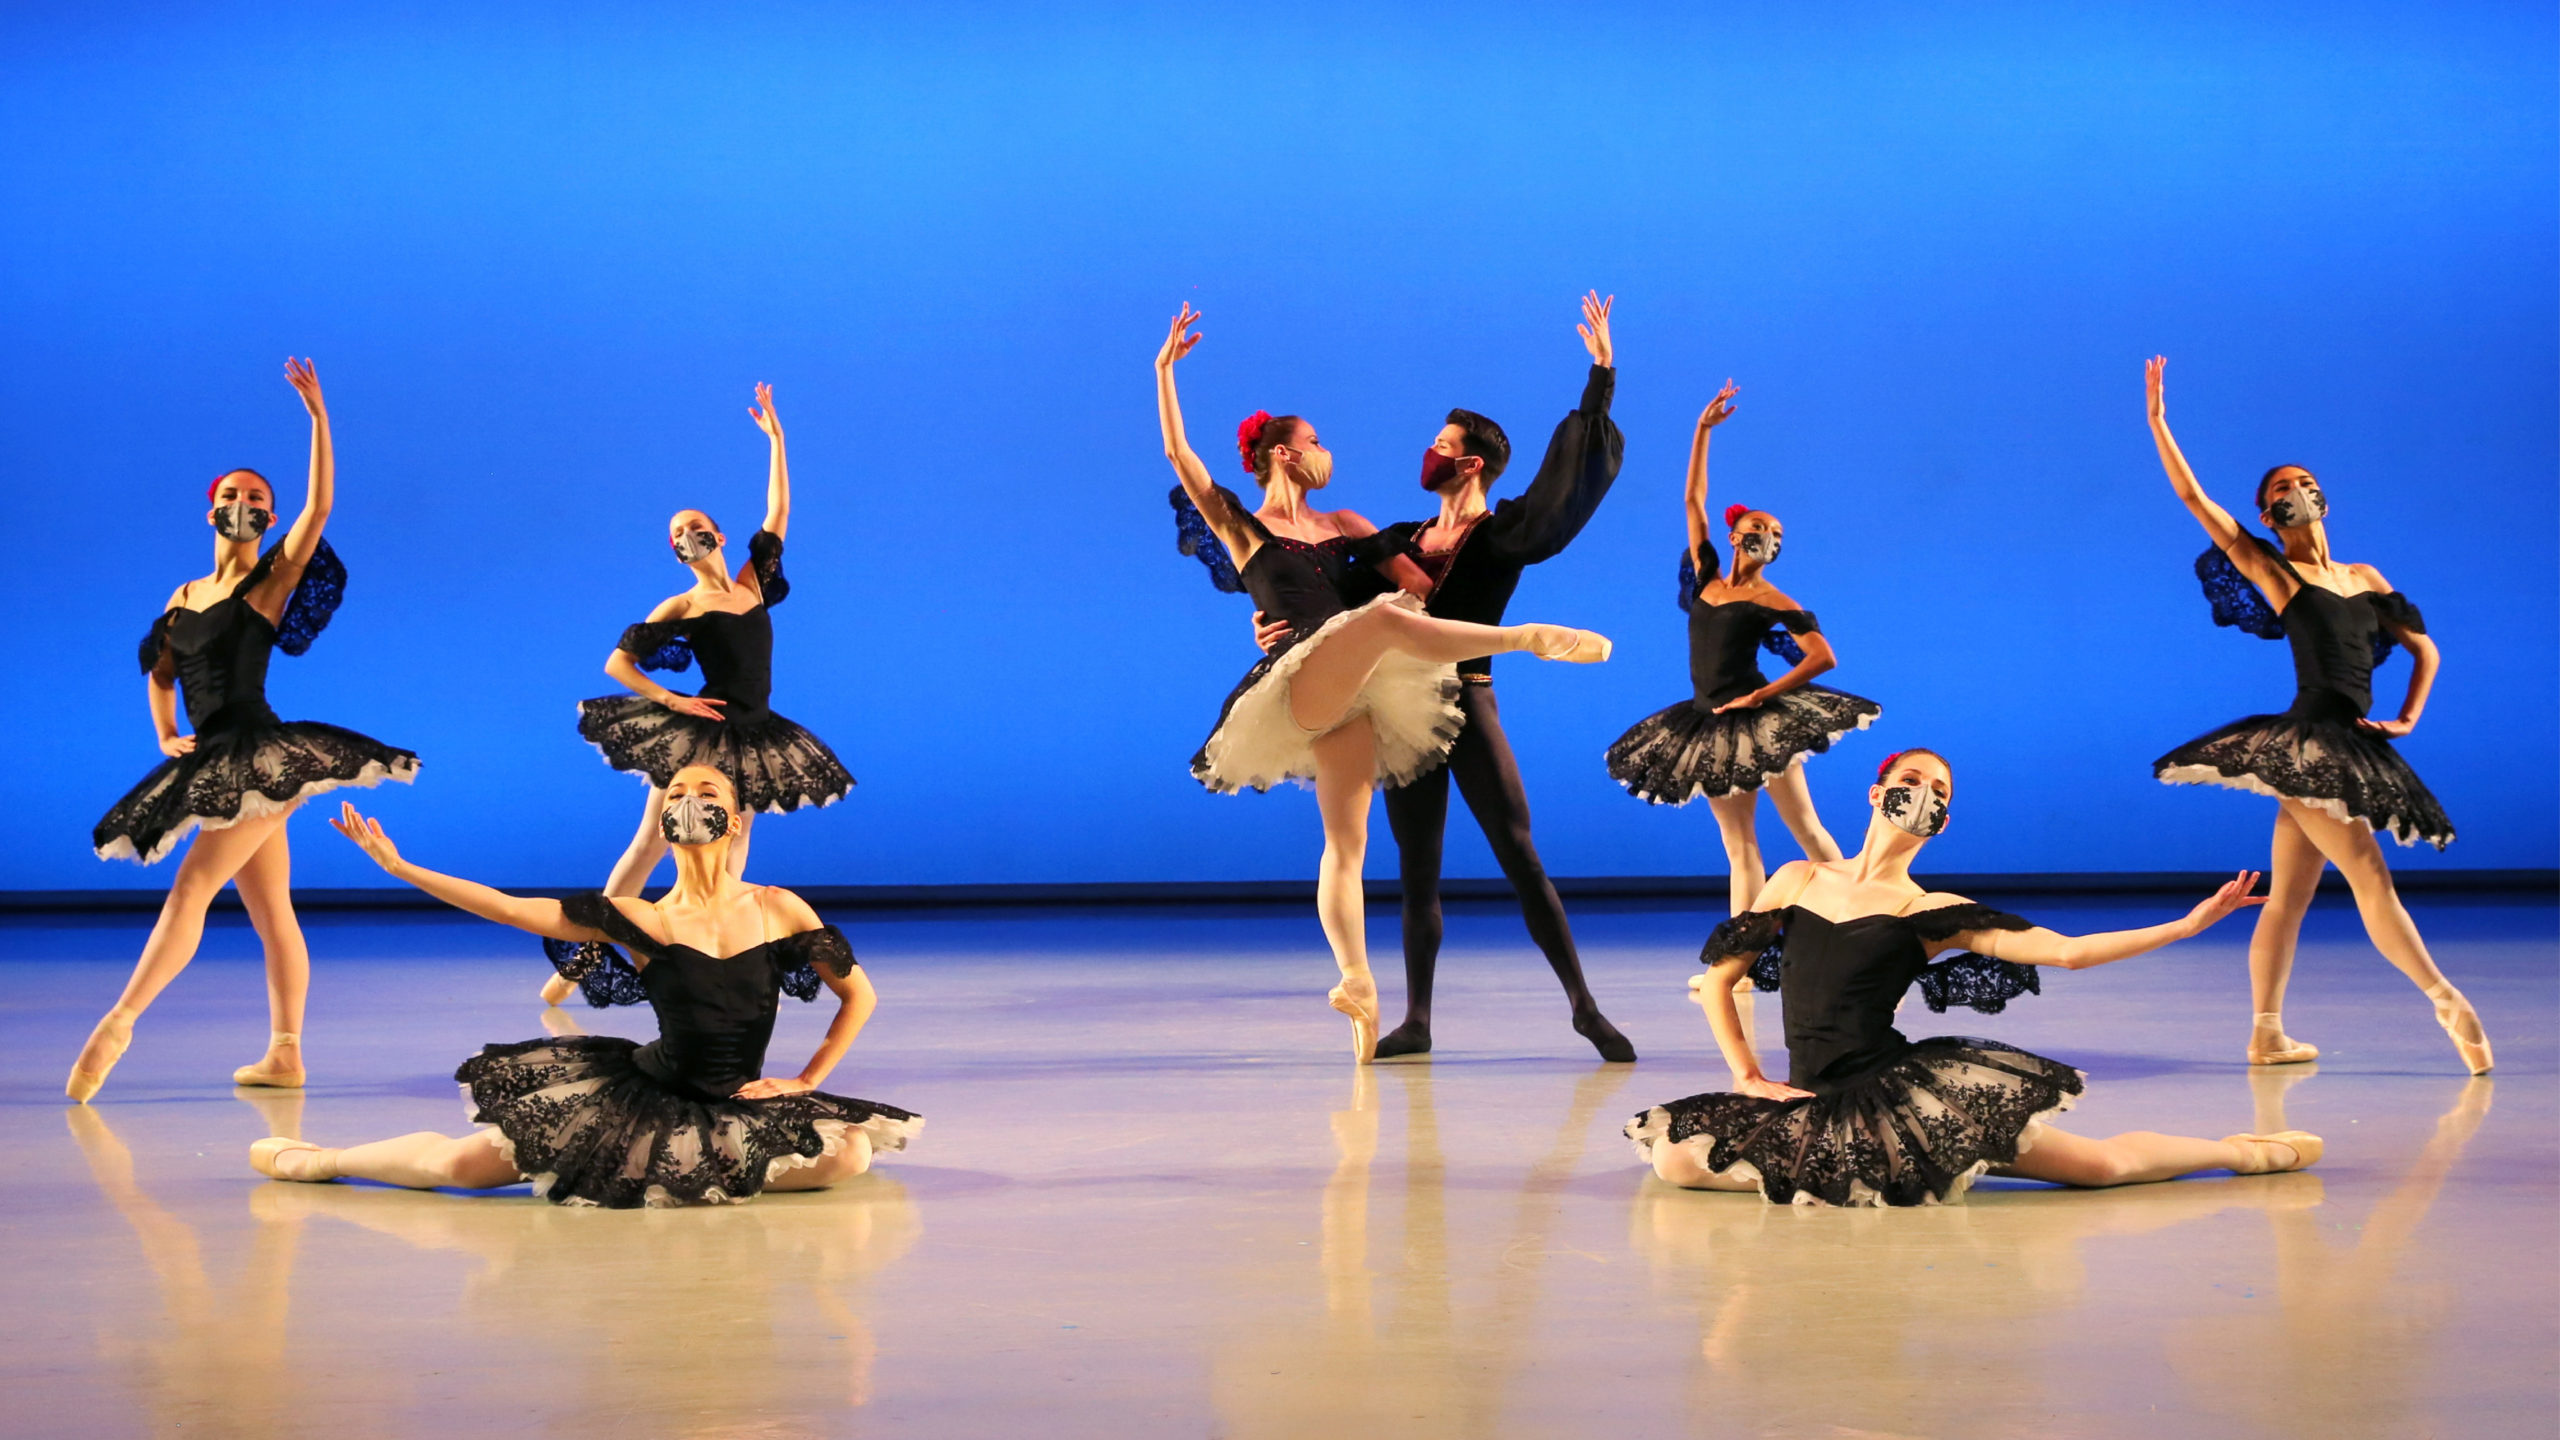 A group of dancers in "Paquita", choreography after Marius Petipa.